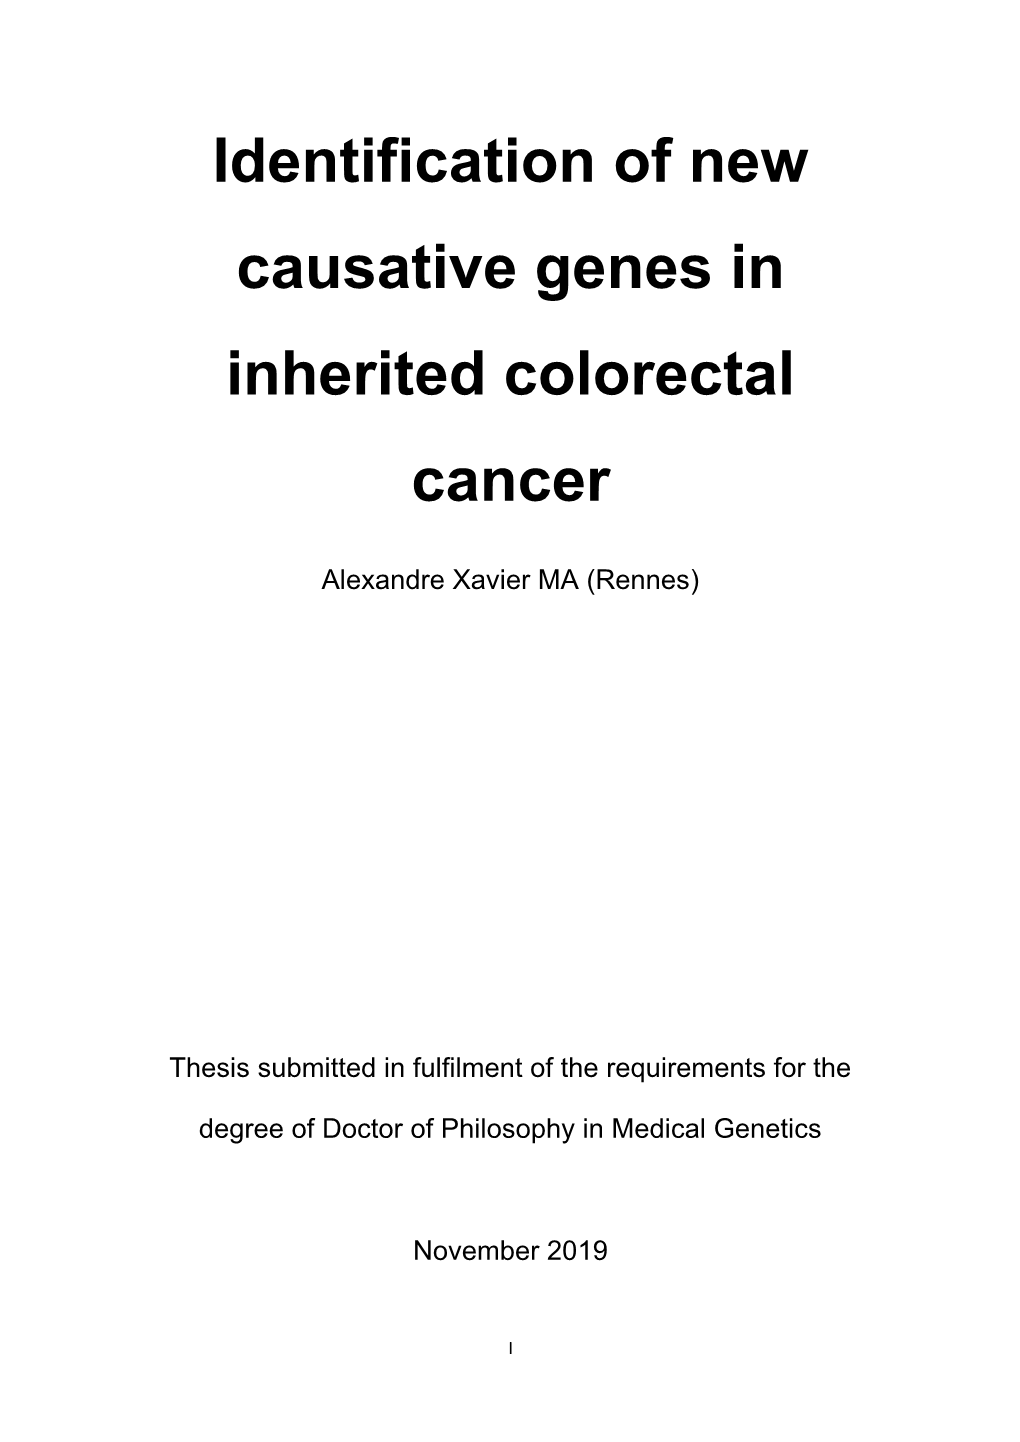 Identification of New Causative Genes in Inherited Colorectal Cancer